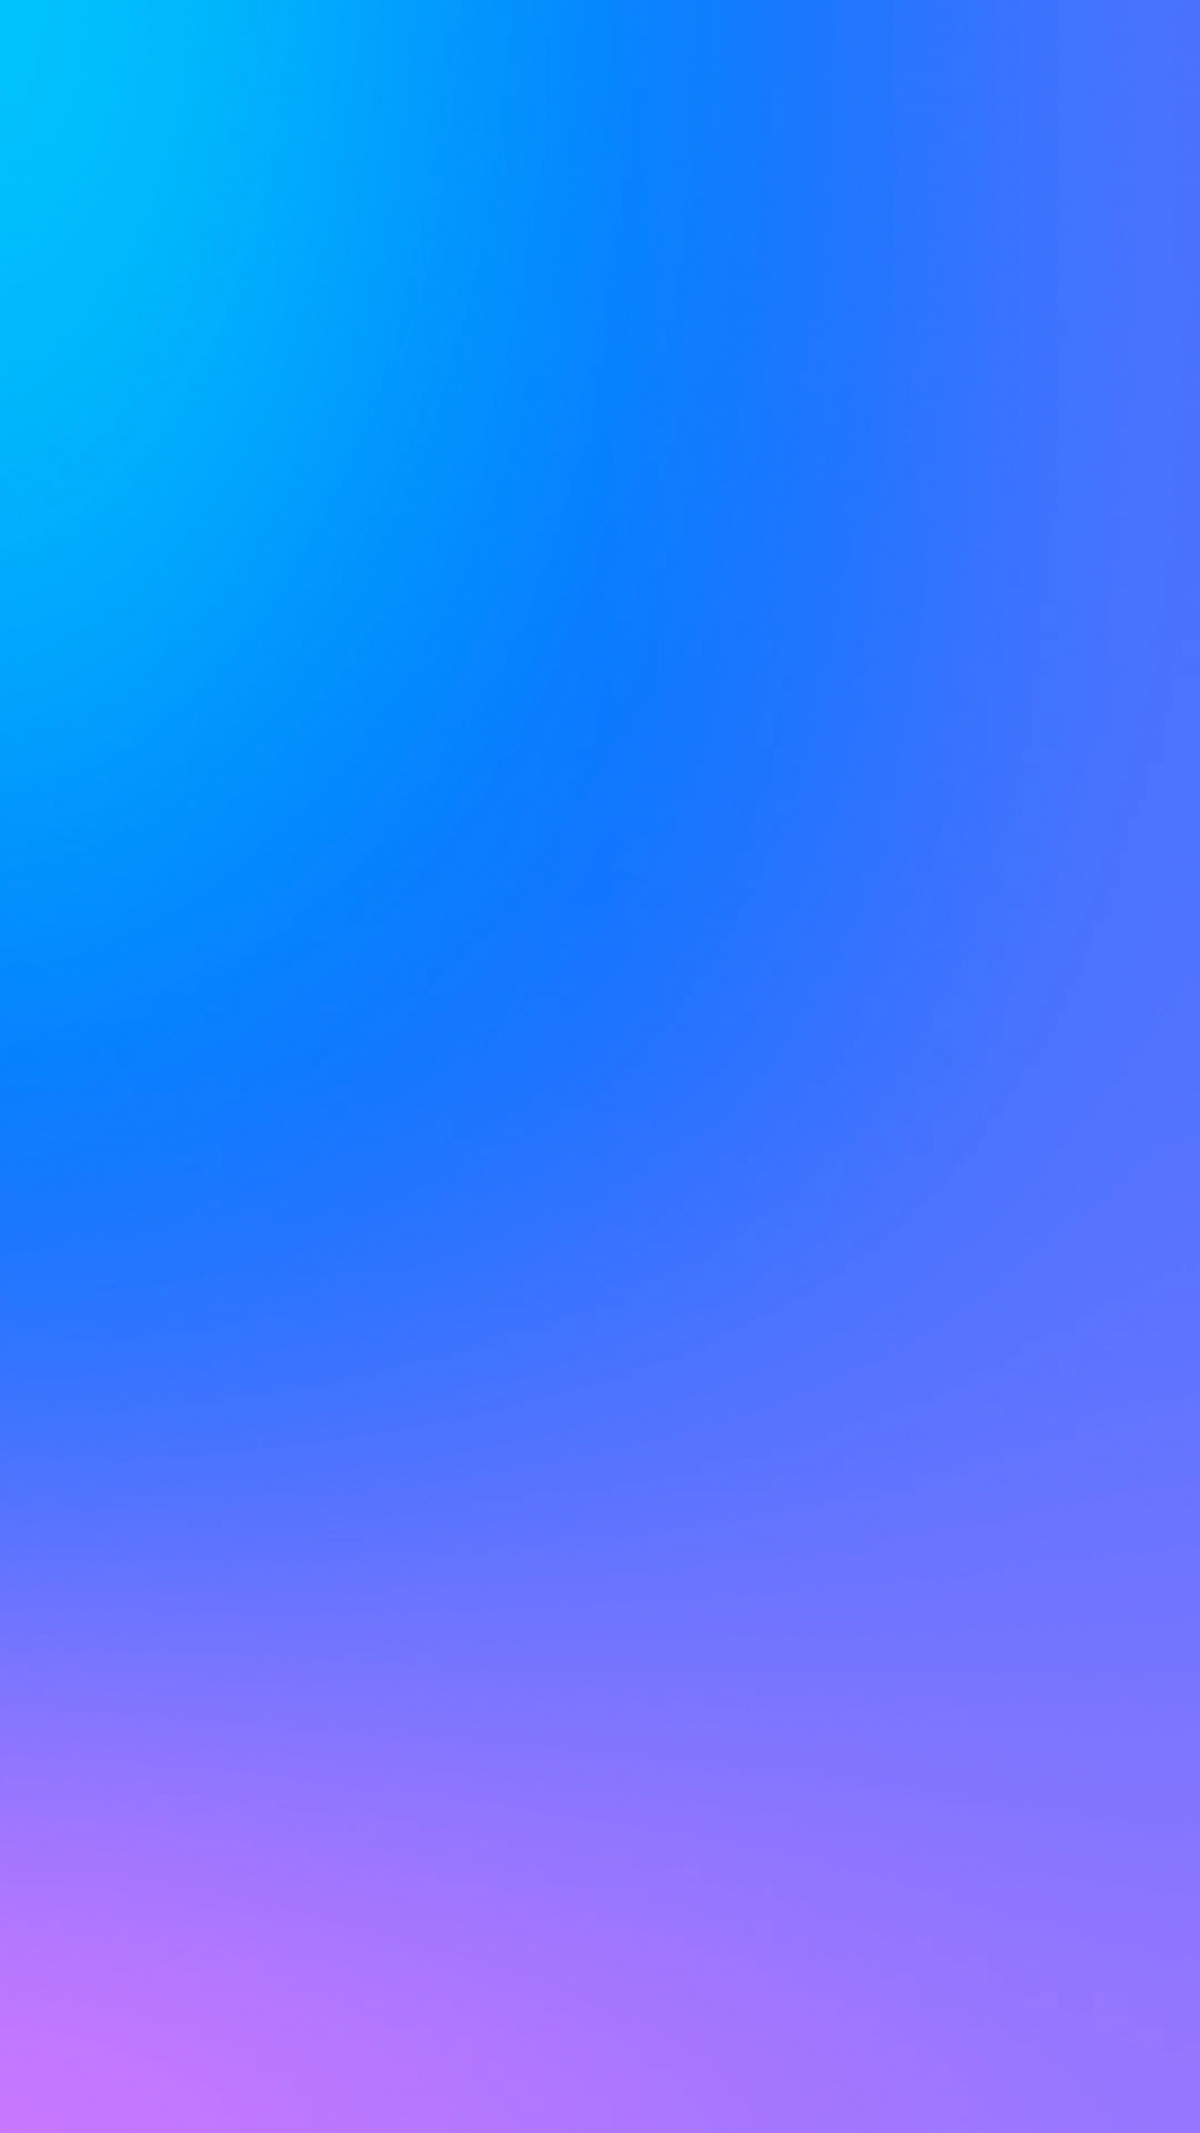 Blue & Purple Gradient wallpaper for Apple iPhone, Mac, iPad and more